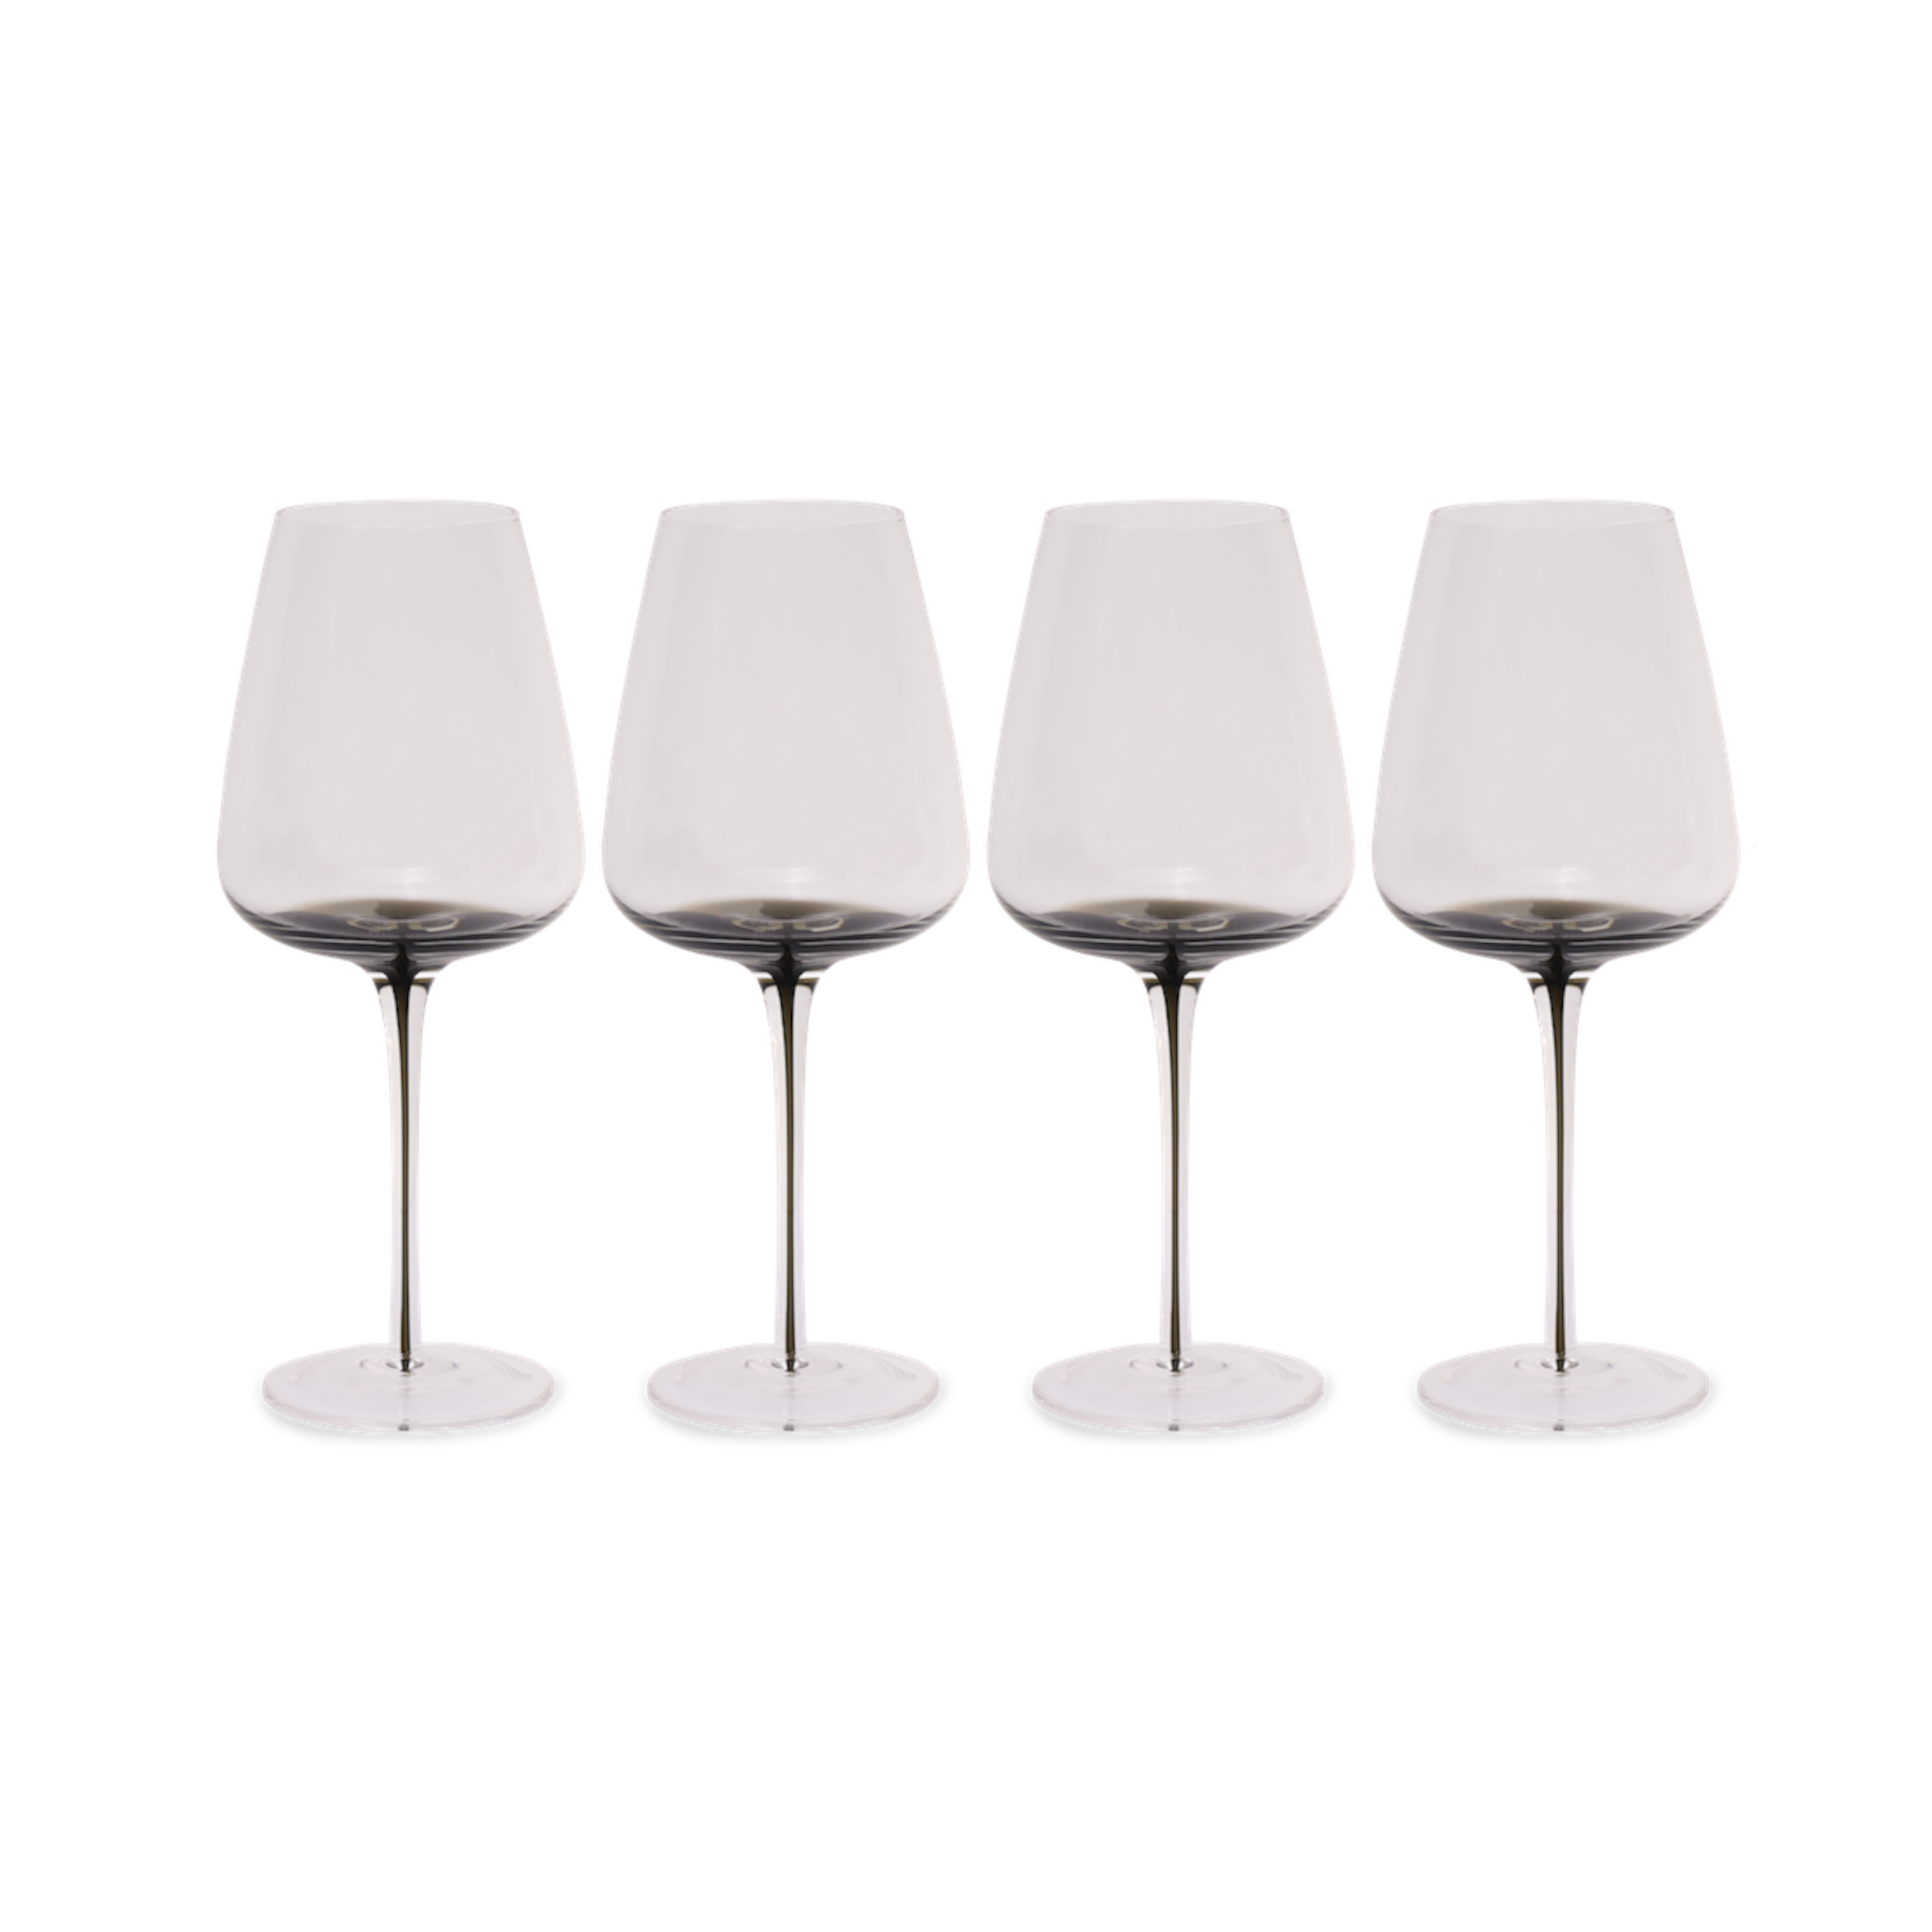 https://cdn.shopify.com/s/files/1/0399/6457/3862/products/SmokedStemWhiteWineGlasses.png?v=1680293171&width=3492